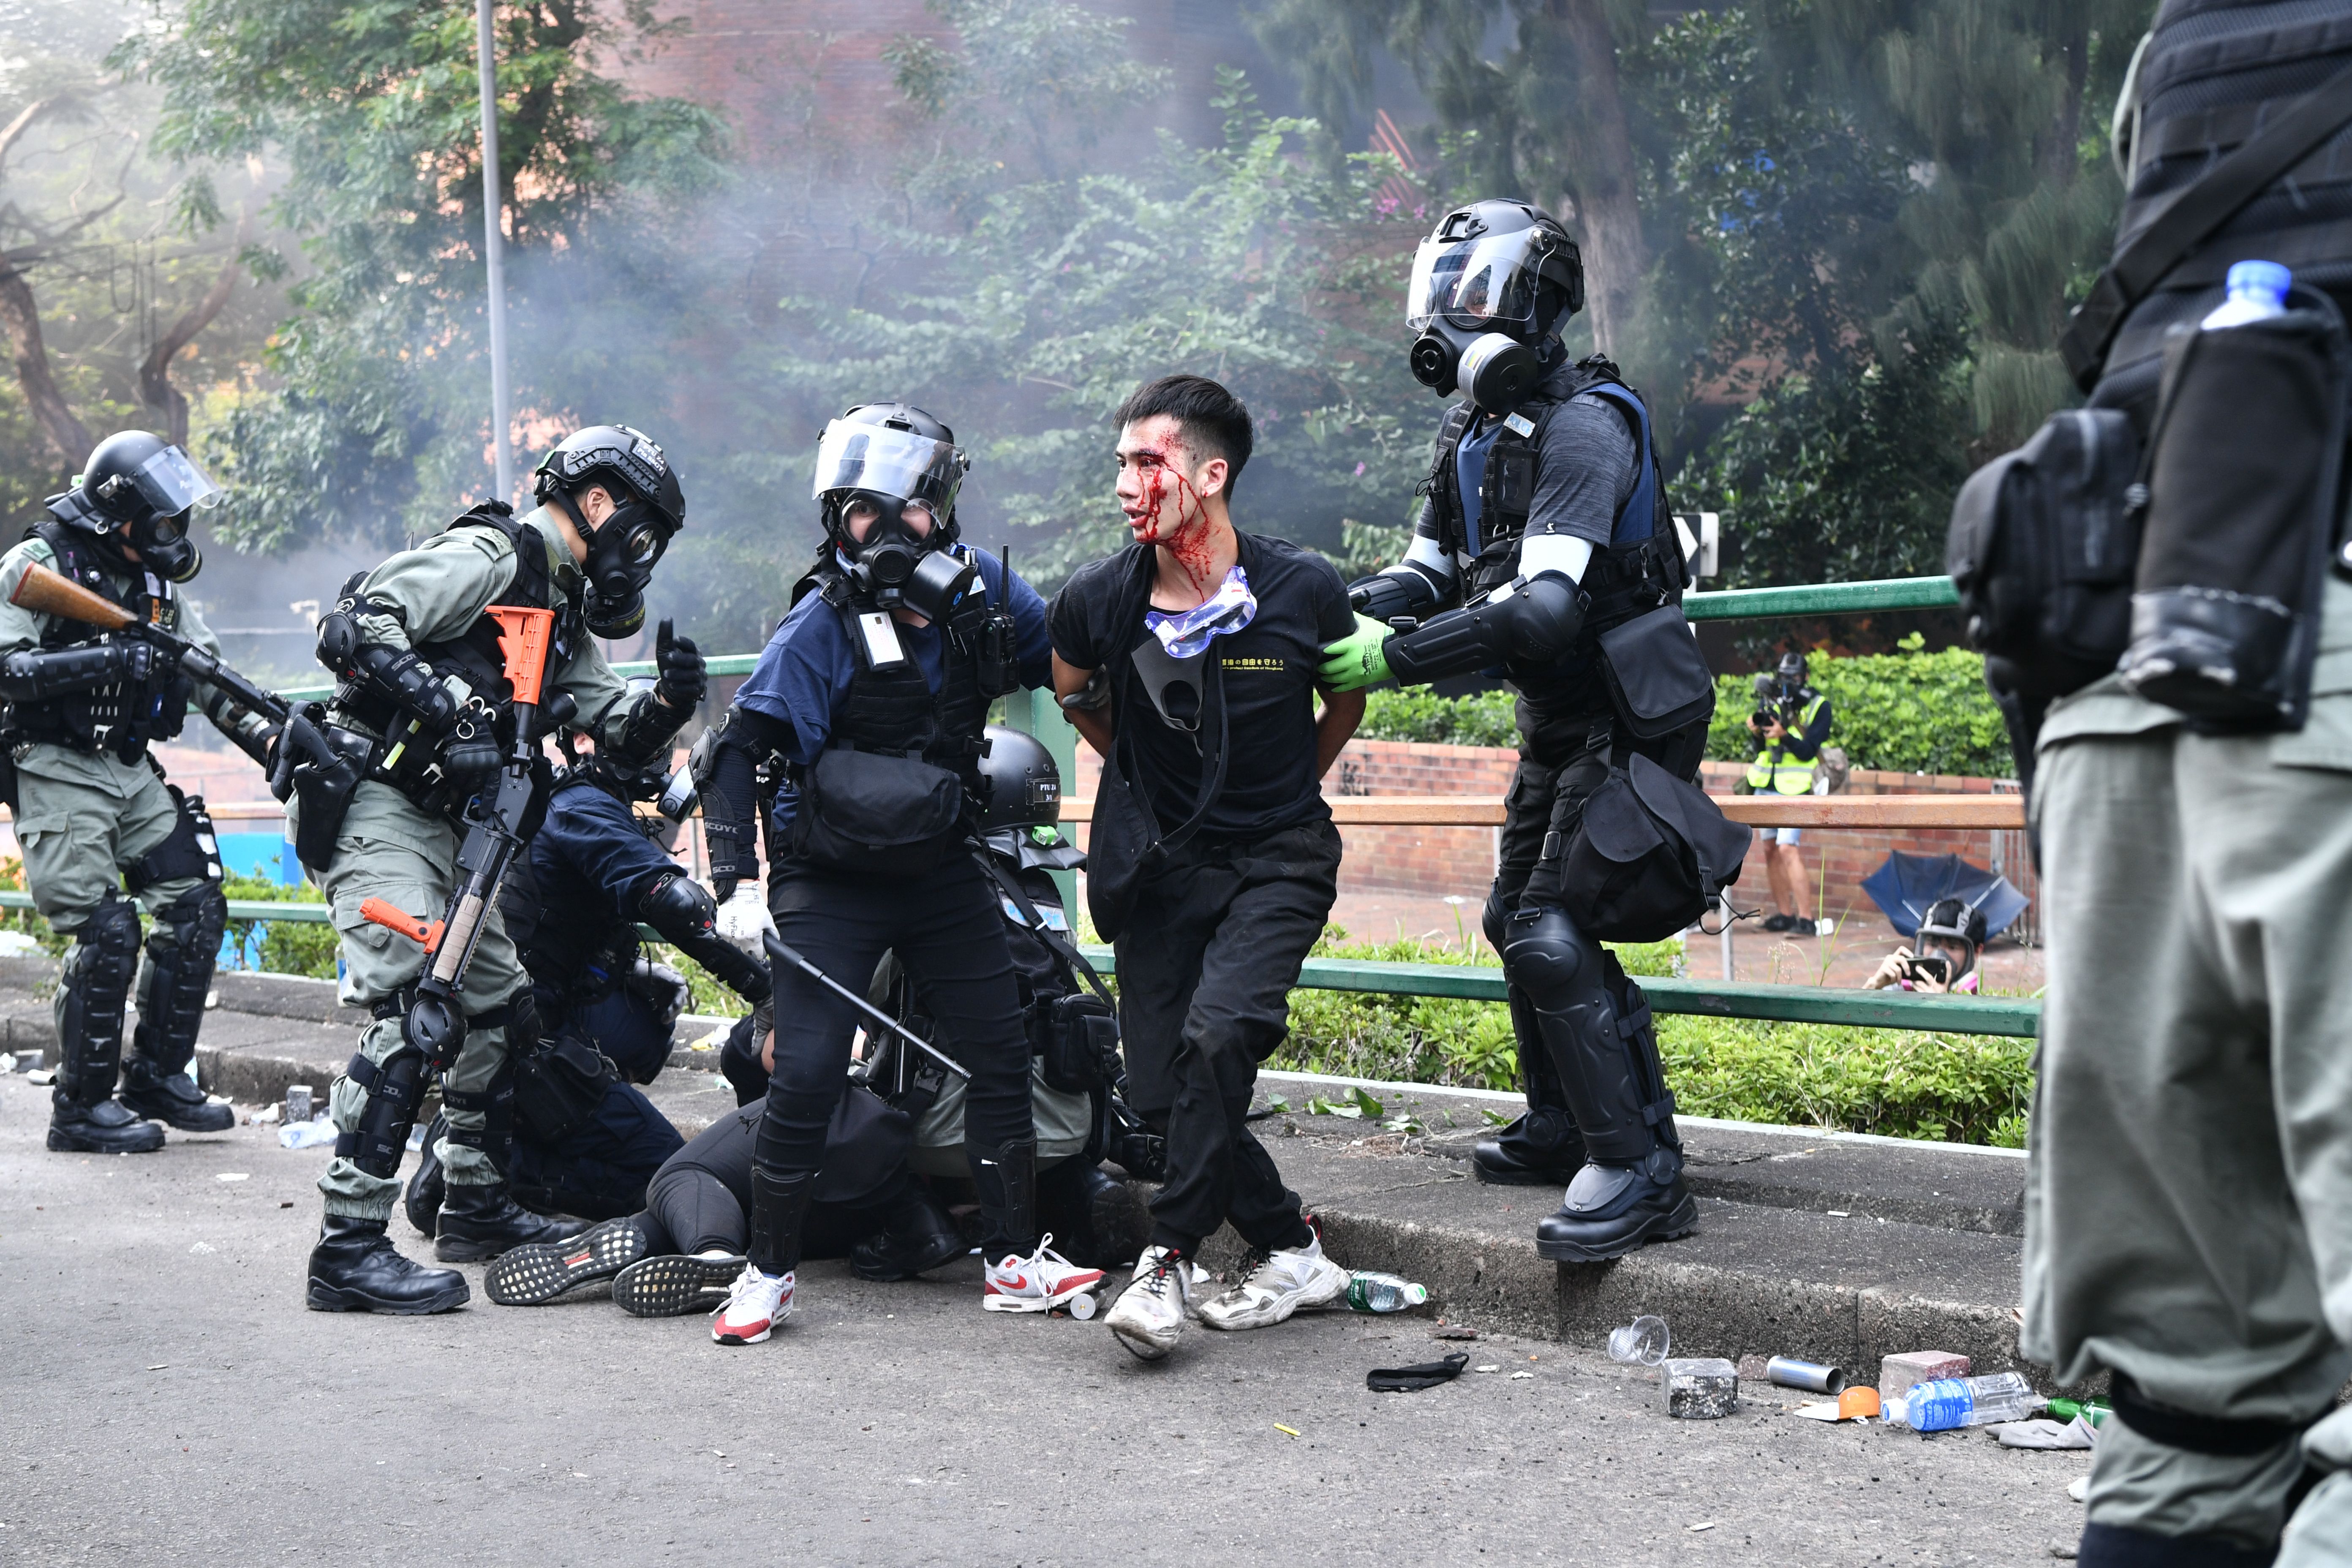 Protesters clashed with police near the Hong Kong Polytechnic University on November 18, 2019.